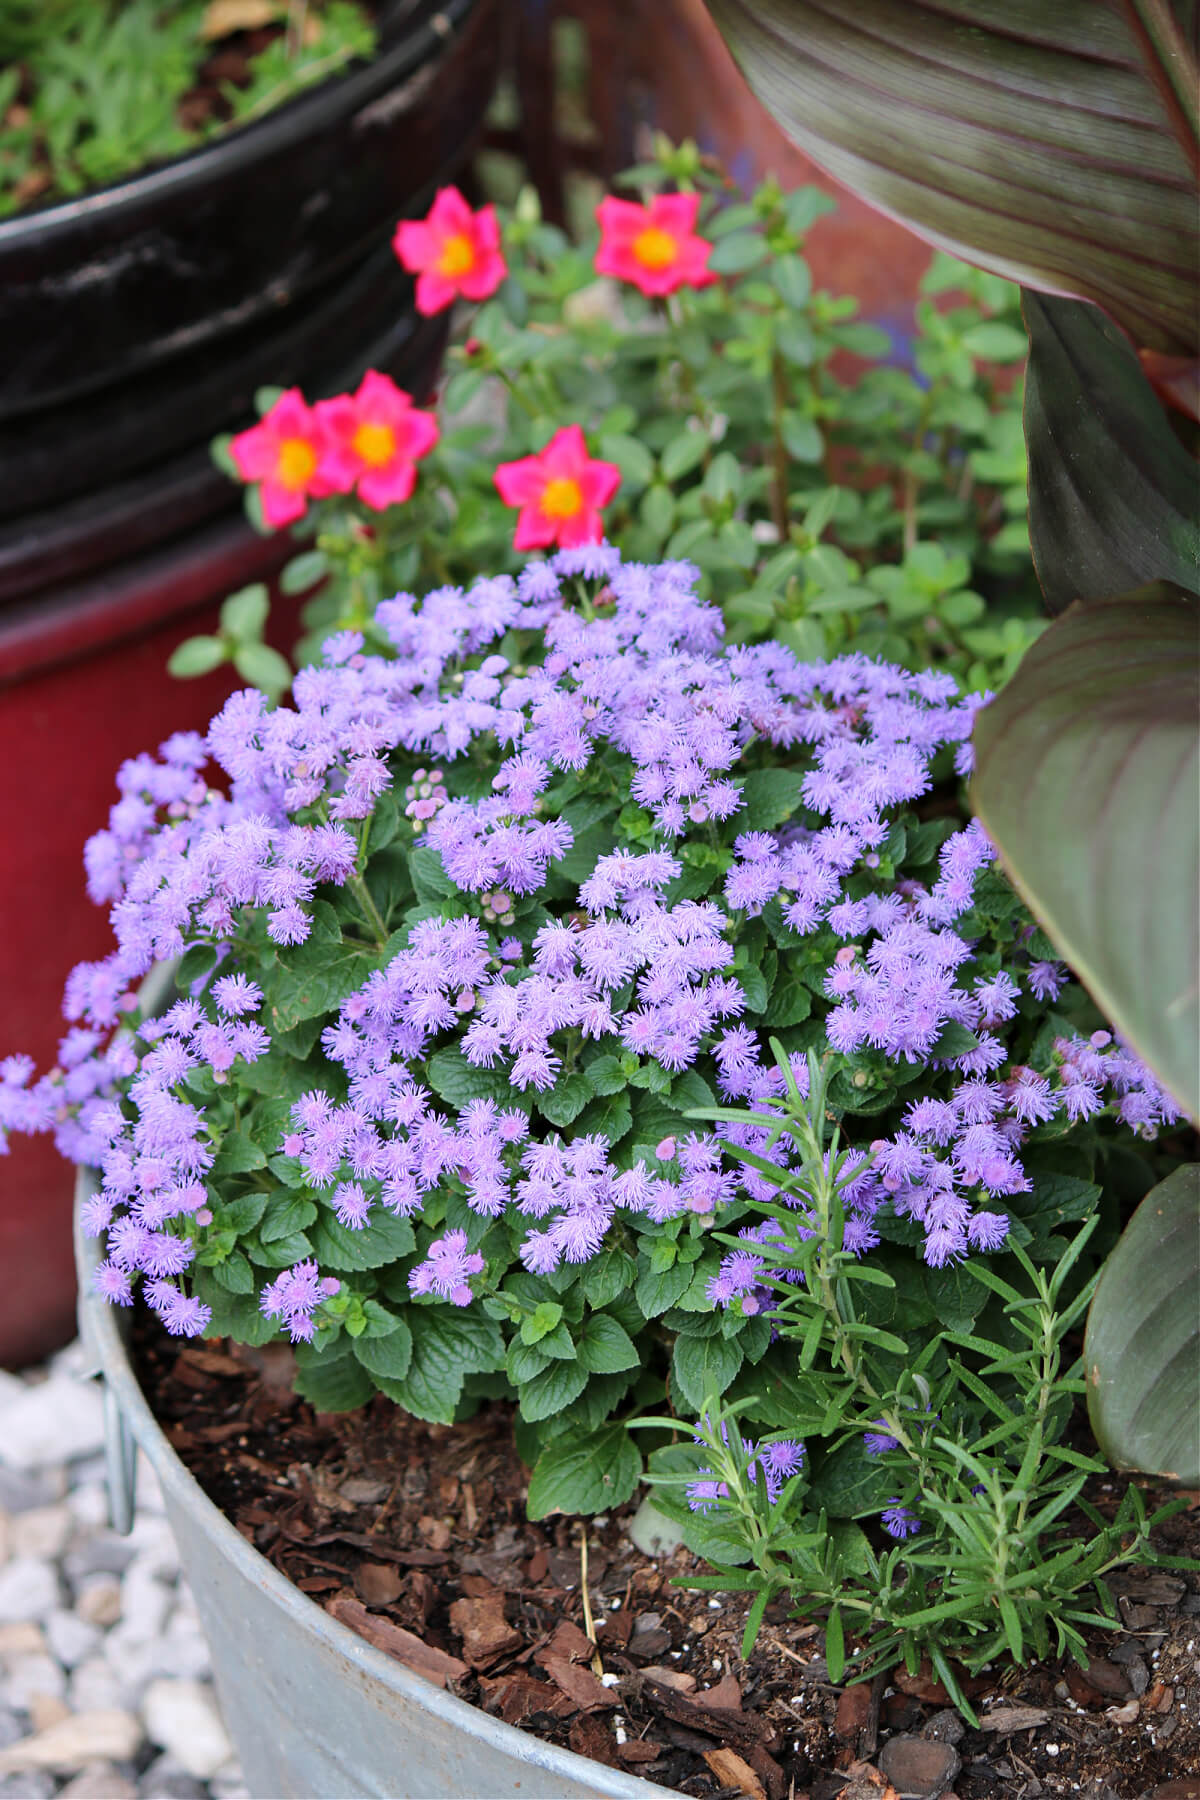 This beautiful plant has many small purple blooms. It is next to a small rosemary plant.